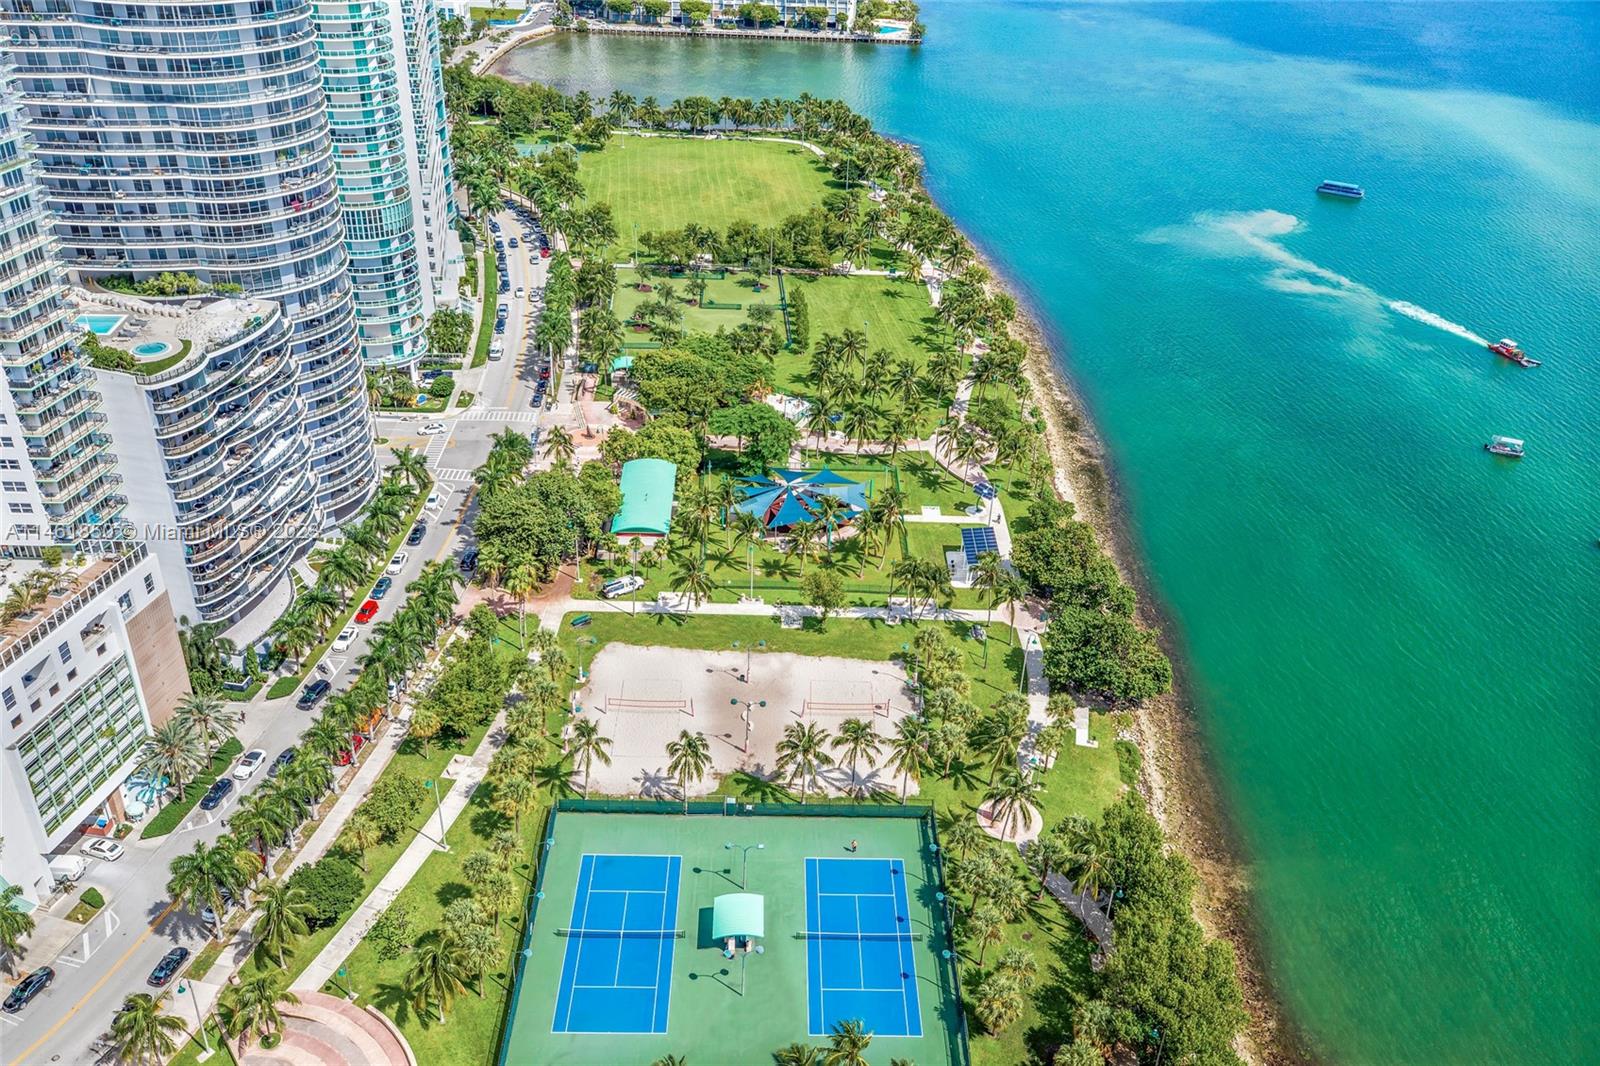 Grand opportunity with lowest price per Sqft in Edgewater and on the water! Grand Location, Views, Services, Retail, Grills, Bars, Pool, Sauna, Gym & more. Make your life Grand!  The Grand is near all; free trolley, free metro, train, busses and boats. Rent it 12x per year or daily in the Hilton Hotel program. 1602 SqFt. Travertine Floors indoor and out. Great Bay views and overlooks Margaret Pace Park (2 Tennis and 2 Volleyball courts, 1 full size Basketball court, Dog Run, Kids playground and a Gym area). Steps to Publix & Wells Fargo. etc..